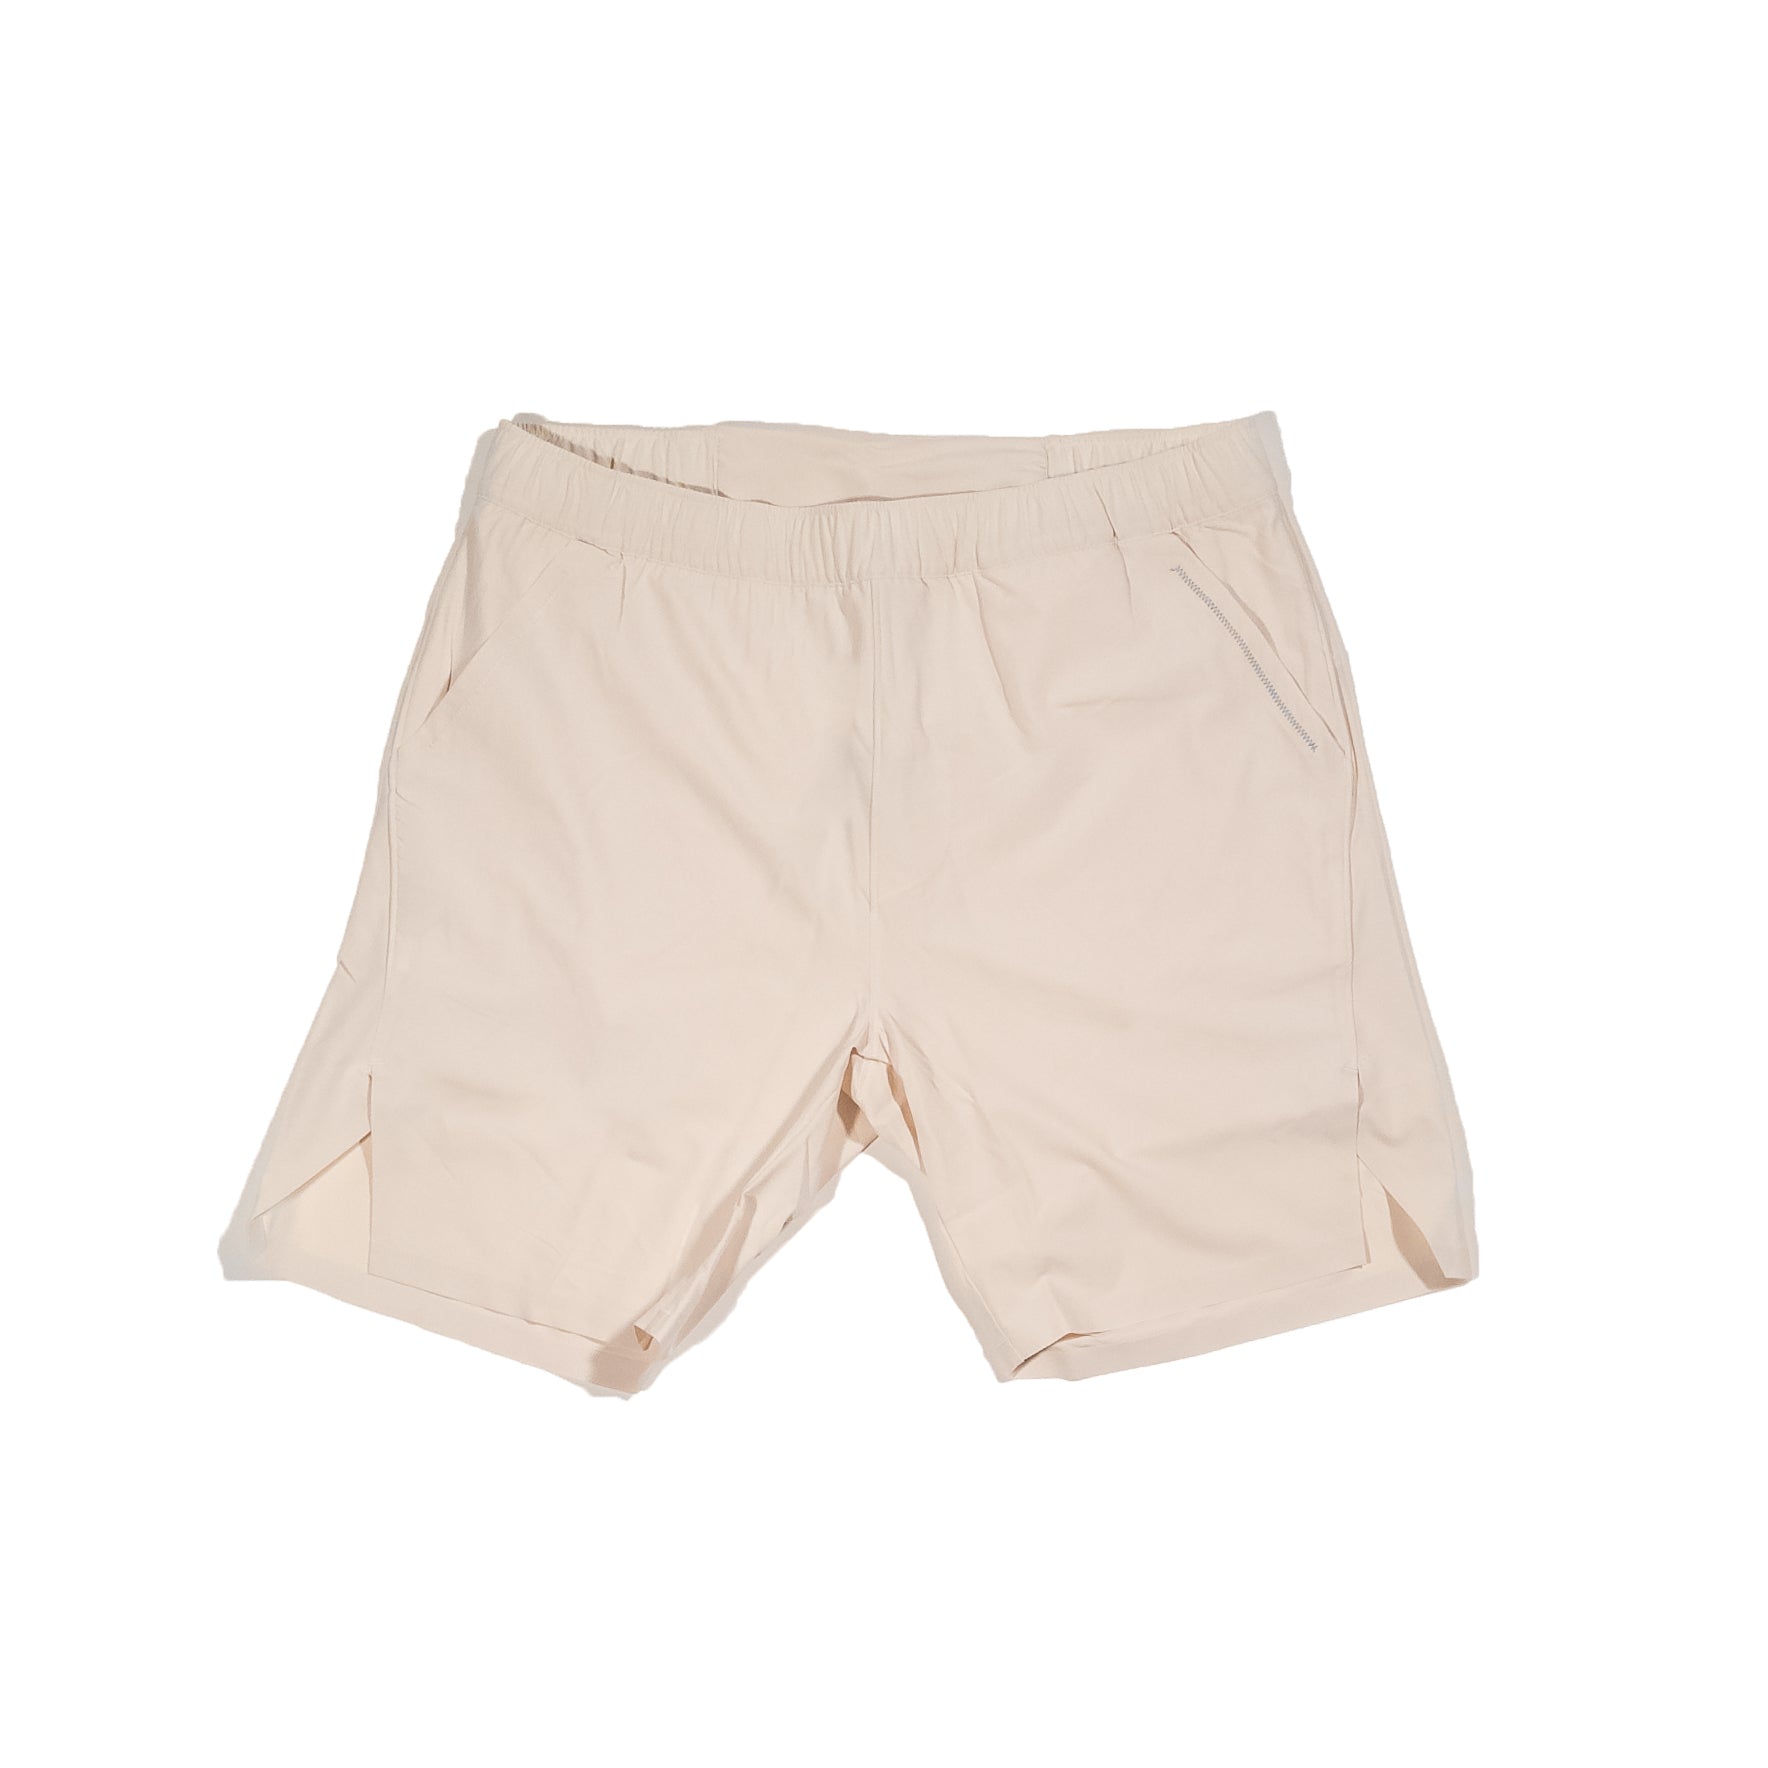 Match Shorts - 7" Inseam with Liner